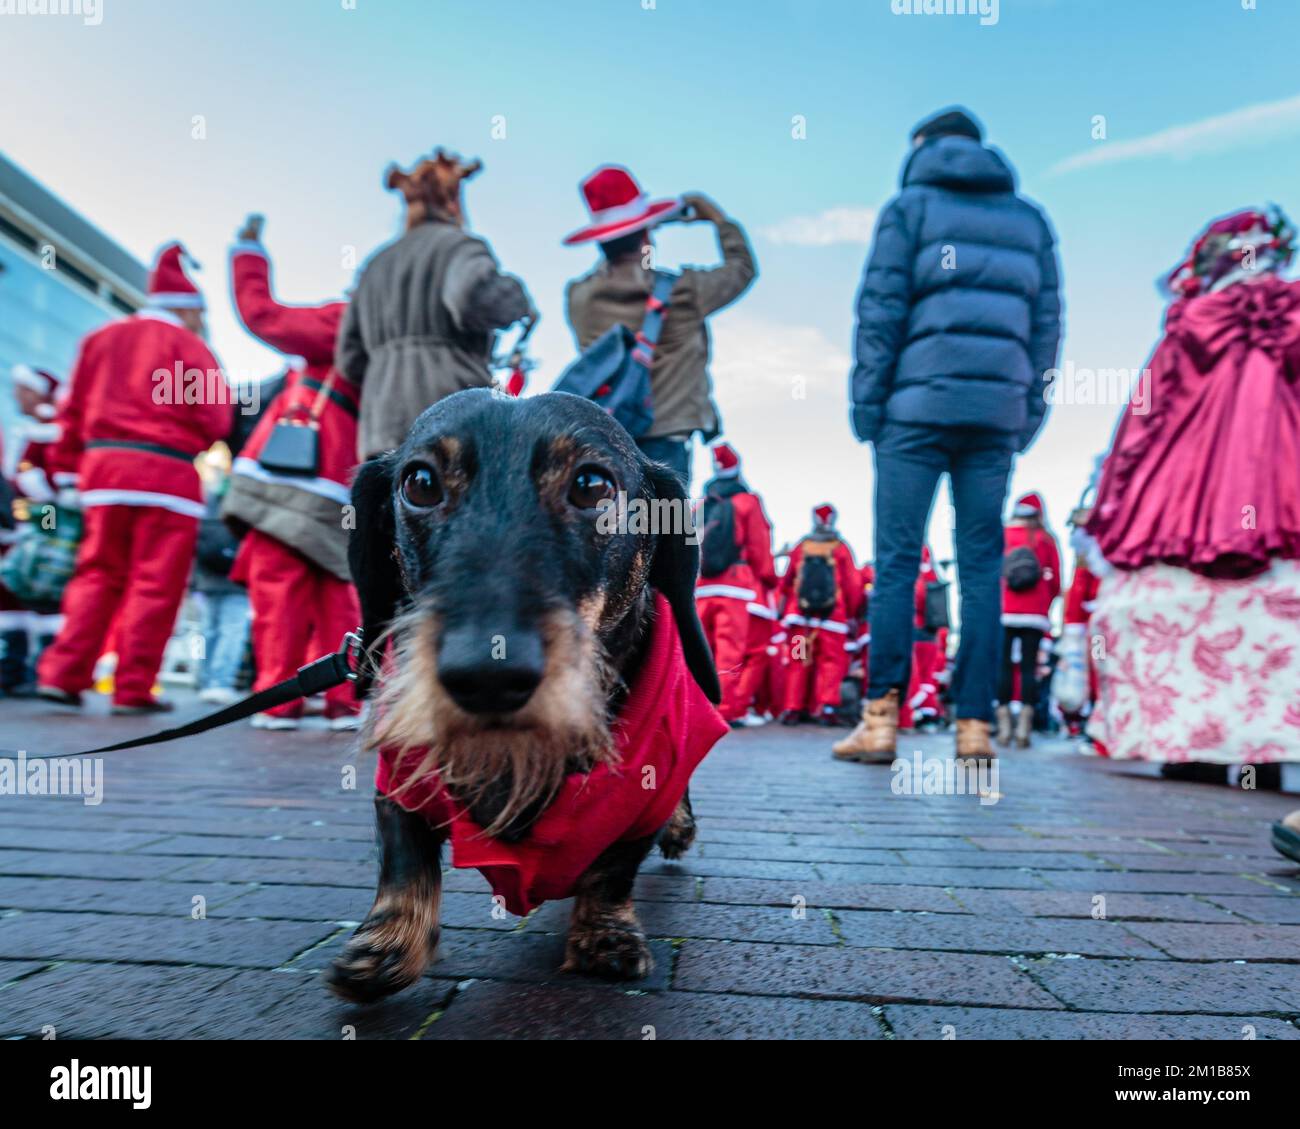 Even dogs dress up for Santacon fun in London. Stock Photo